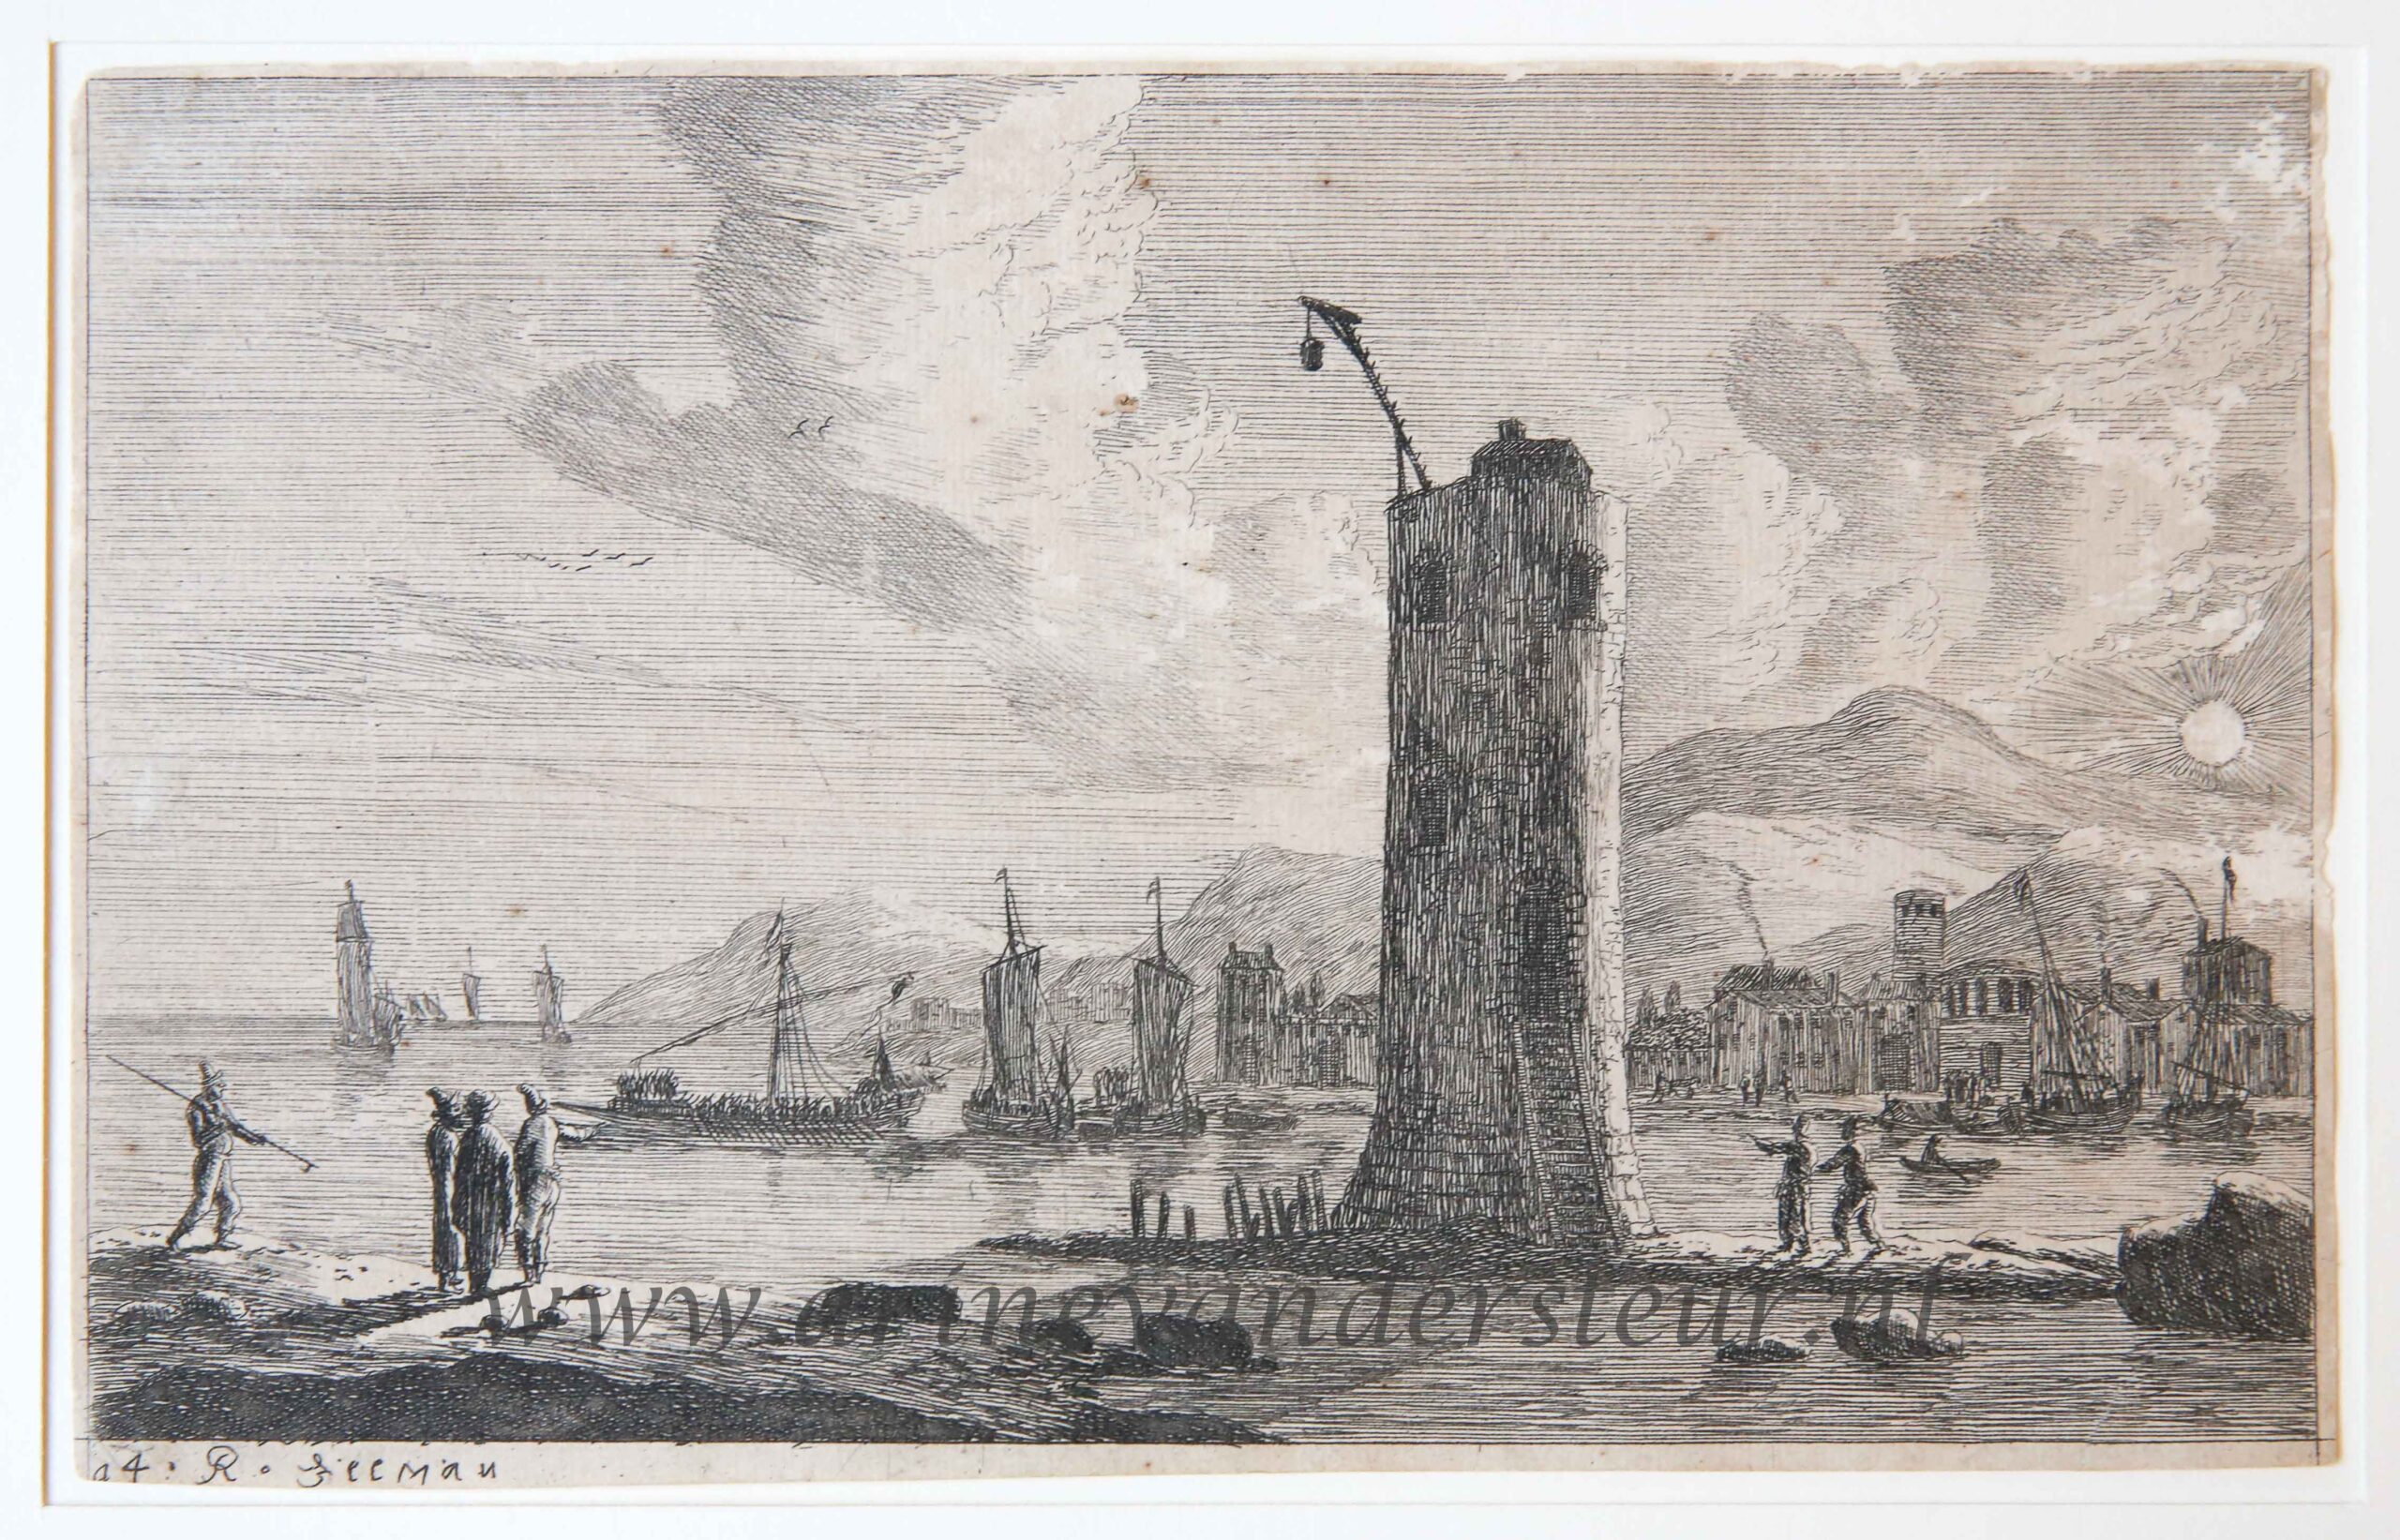 [Antique print, etching] Harbour scene with a tower, published in or after 1656.